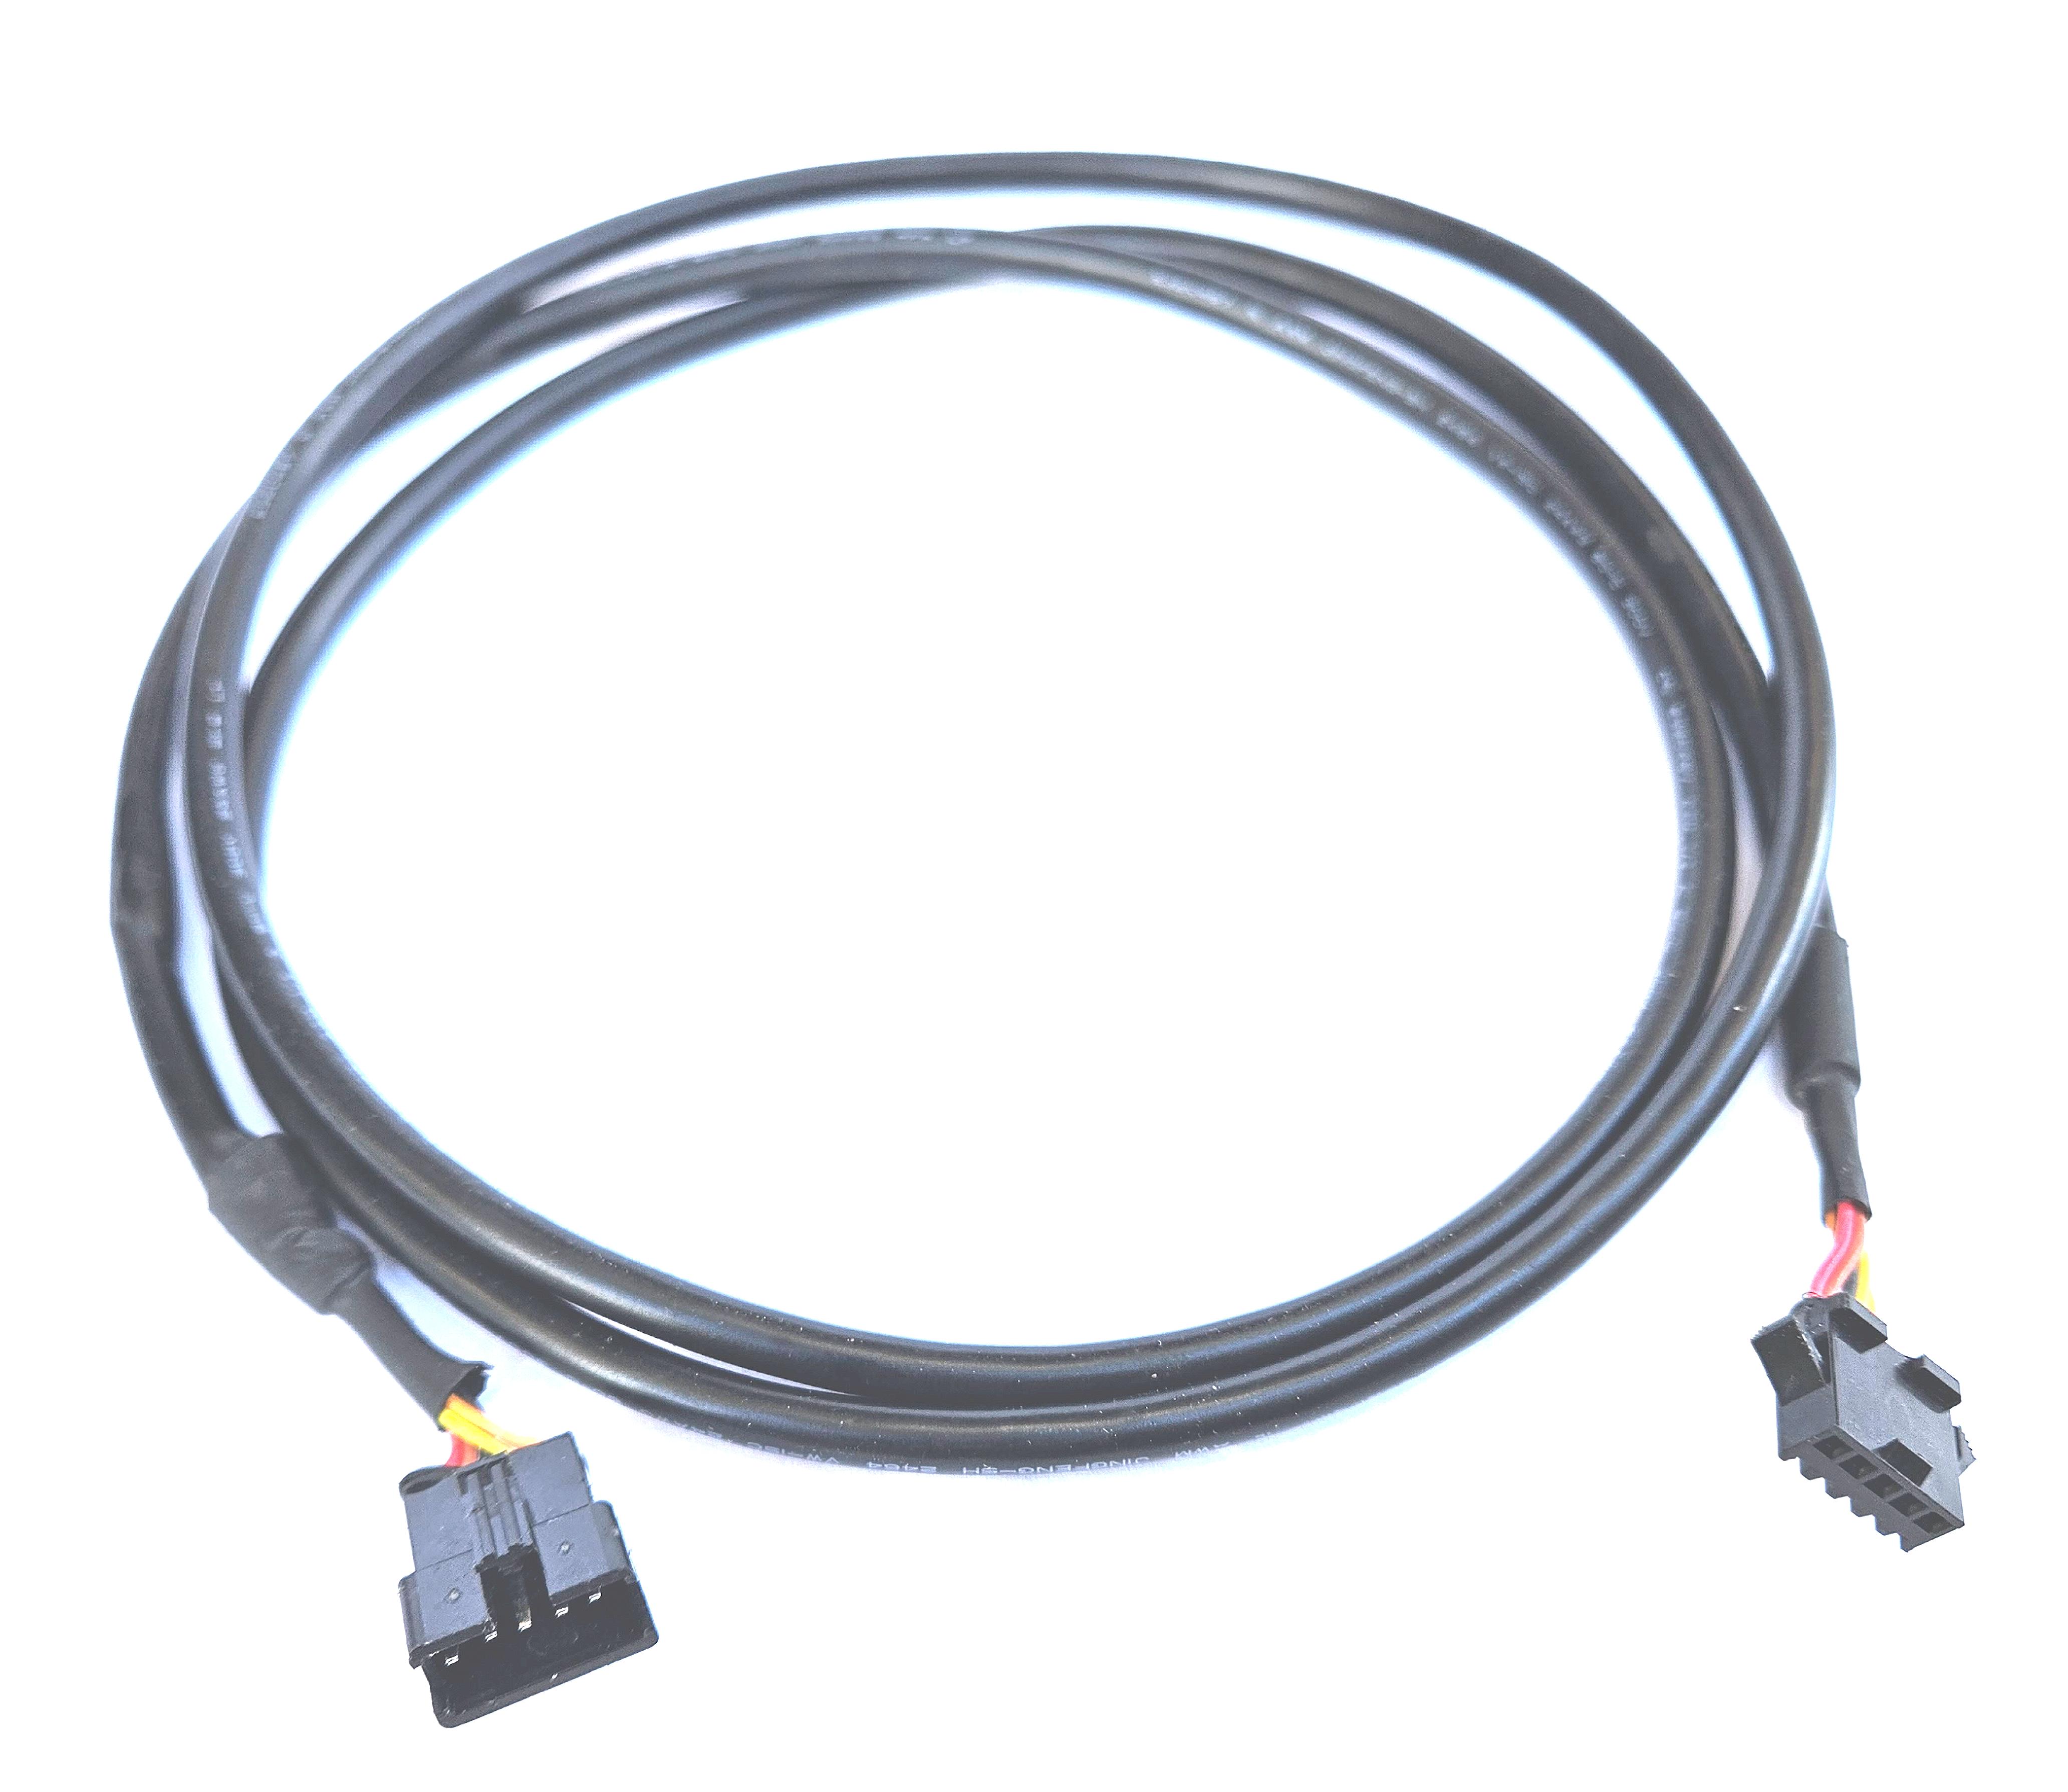 Nautilus T614 Treadmill 900mm Middle Wiring Harness Cable